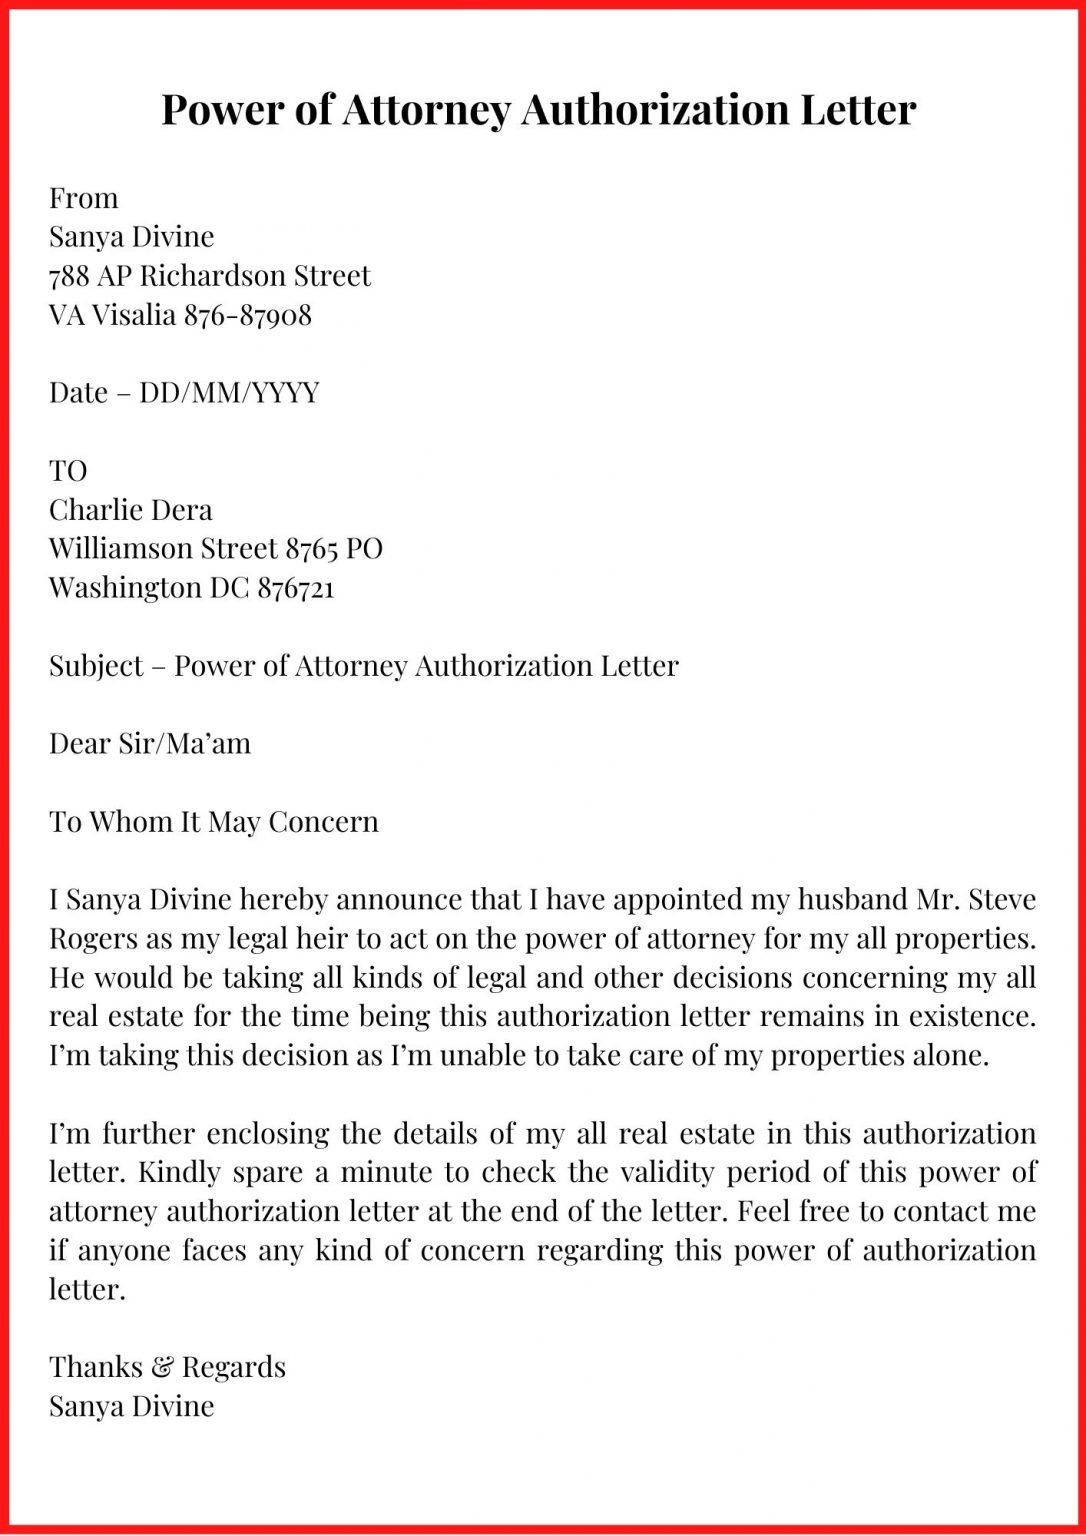 sample-power-of-attorney-authorization-letter-template